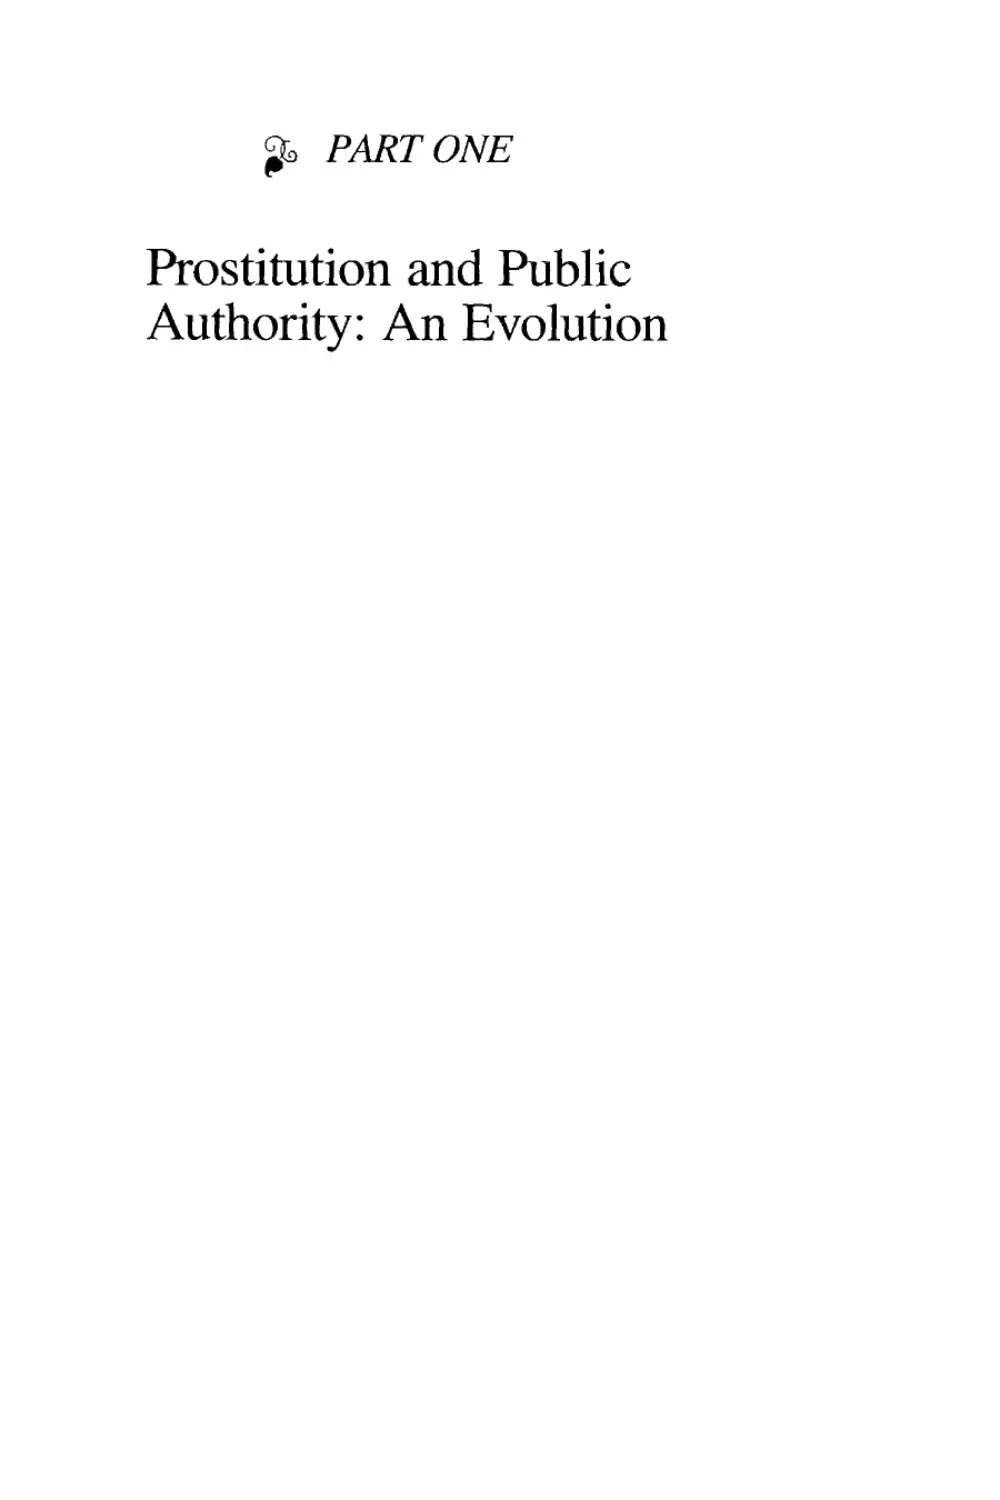 Part One: Prostitution and Public Authority: An Evolution